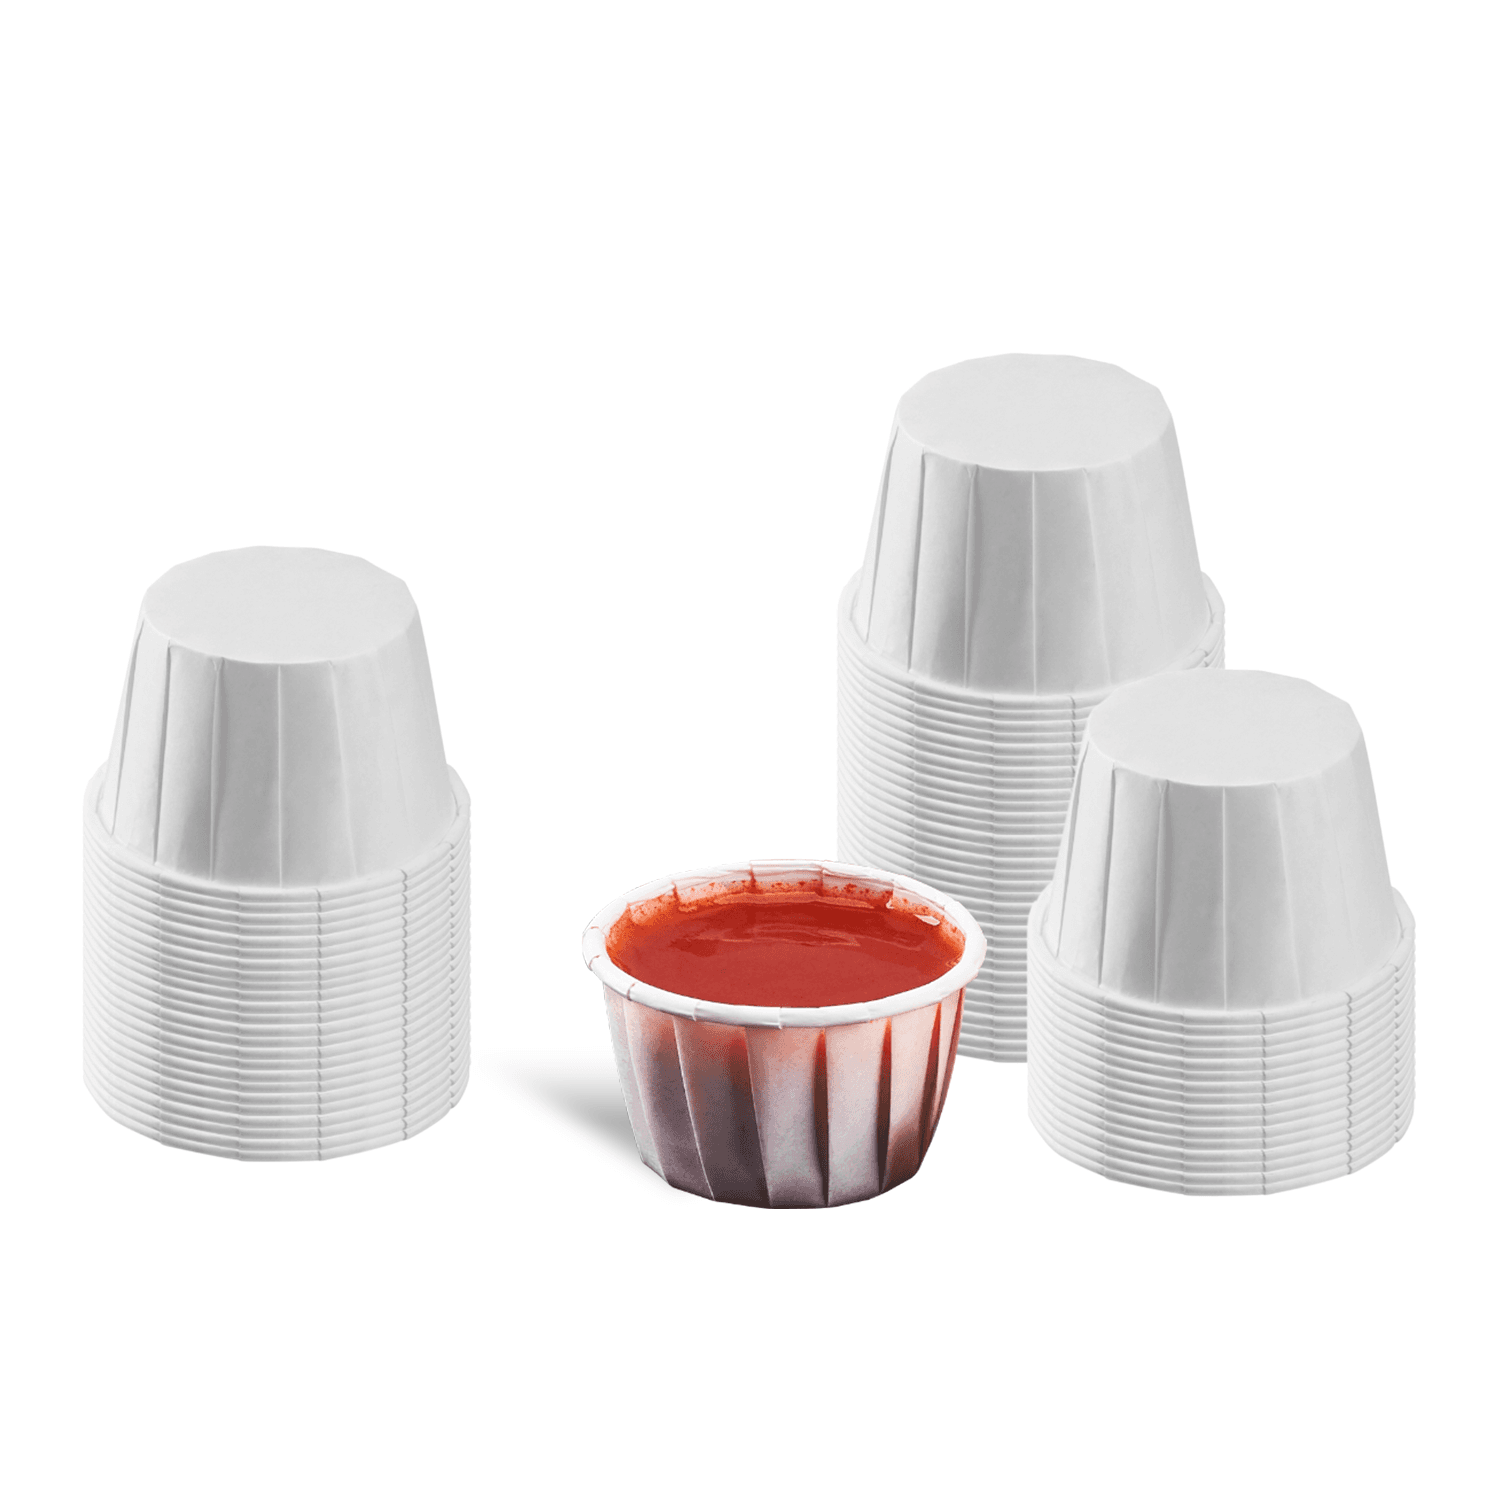 Karat 1.25 oz Paper Portion Cups stacked and one with ketchup